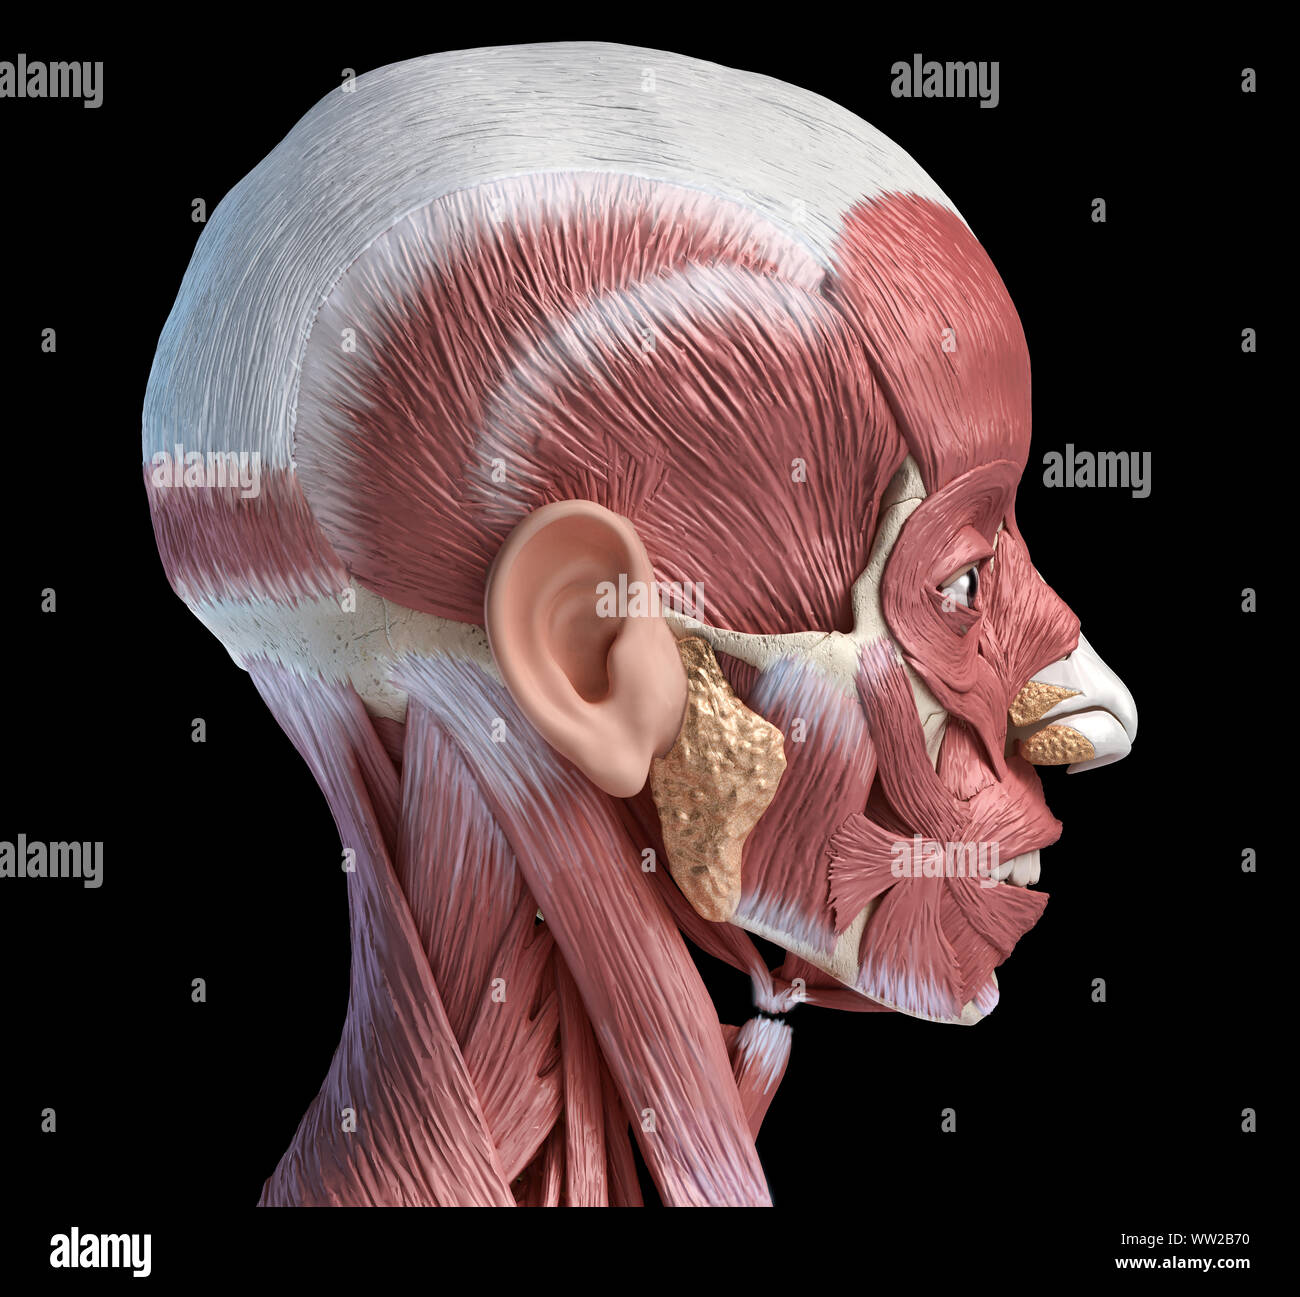 Human head anatomy 3d illustration muscular system, lateral view on black background. Stock Photo